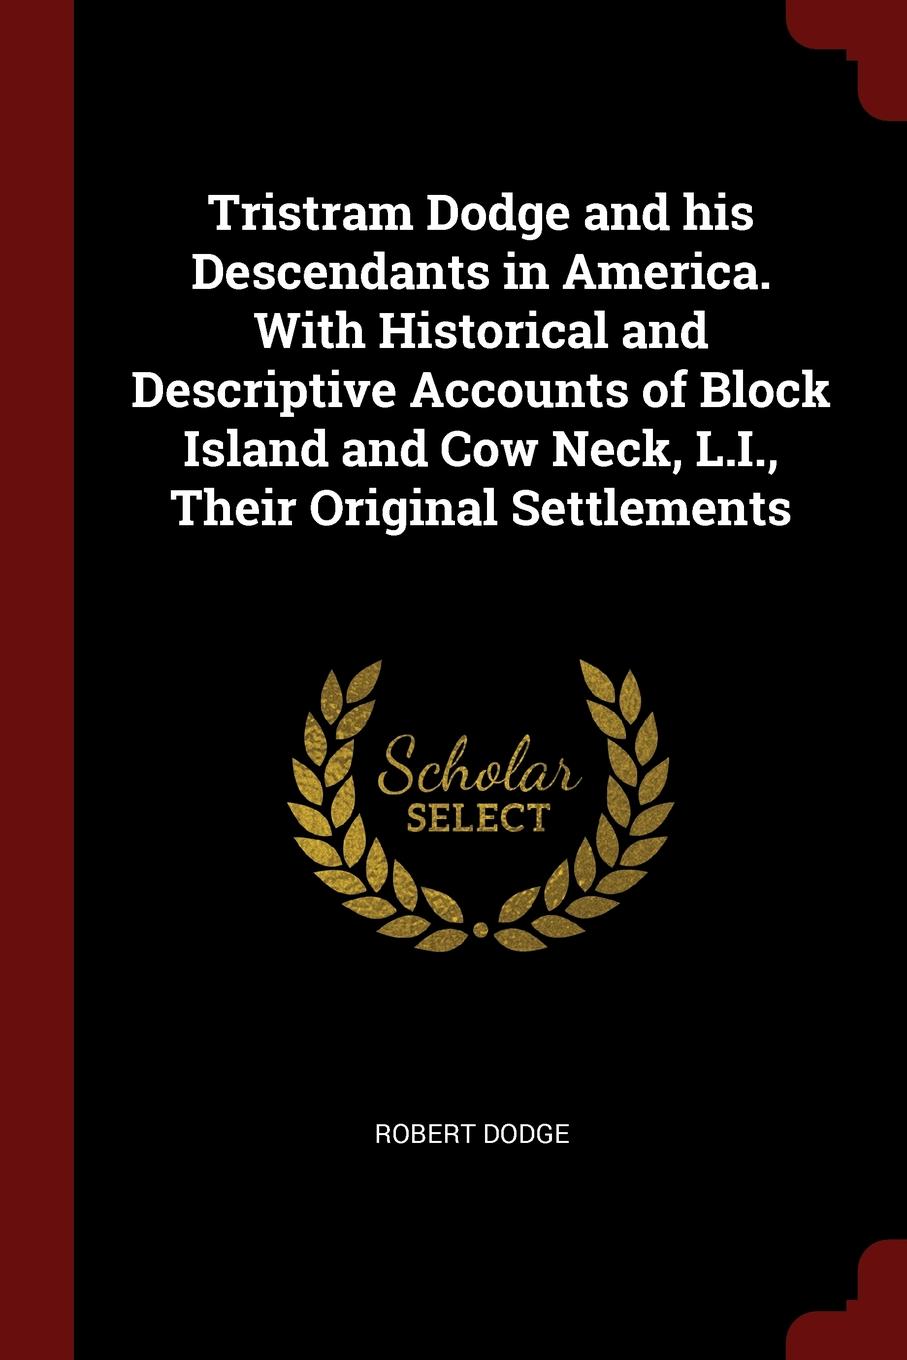 Tristram Dodge and his Descendants in America. With Historical and Descriptive Accounts of Block Island and Cow Neck, L.I., Their Original Settlements